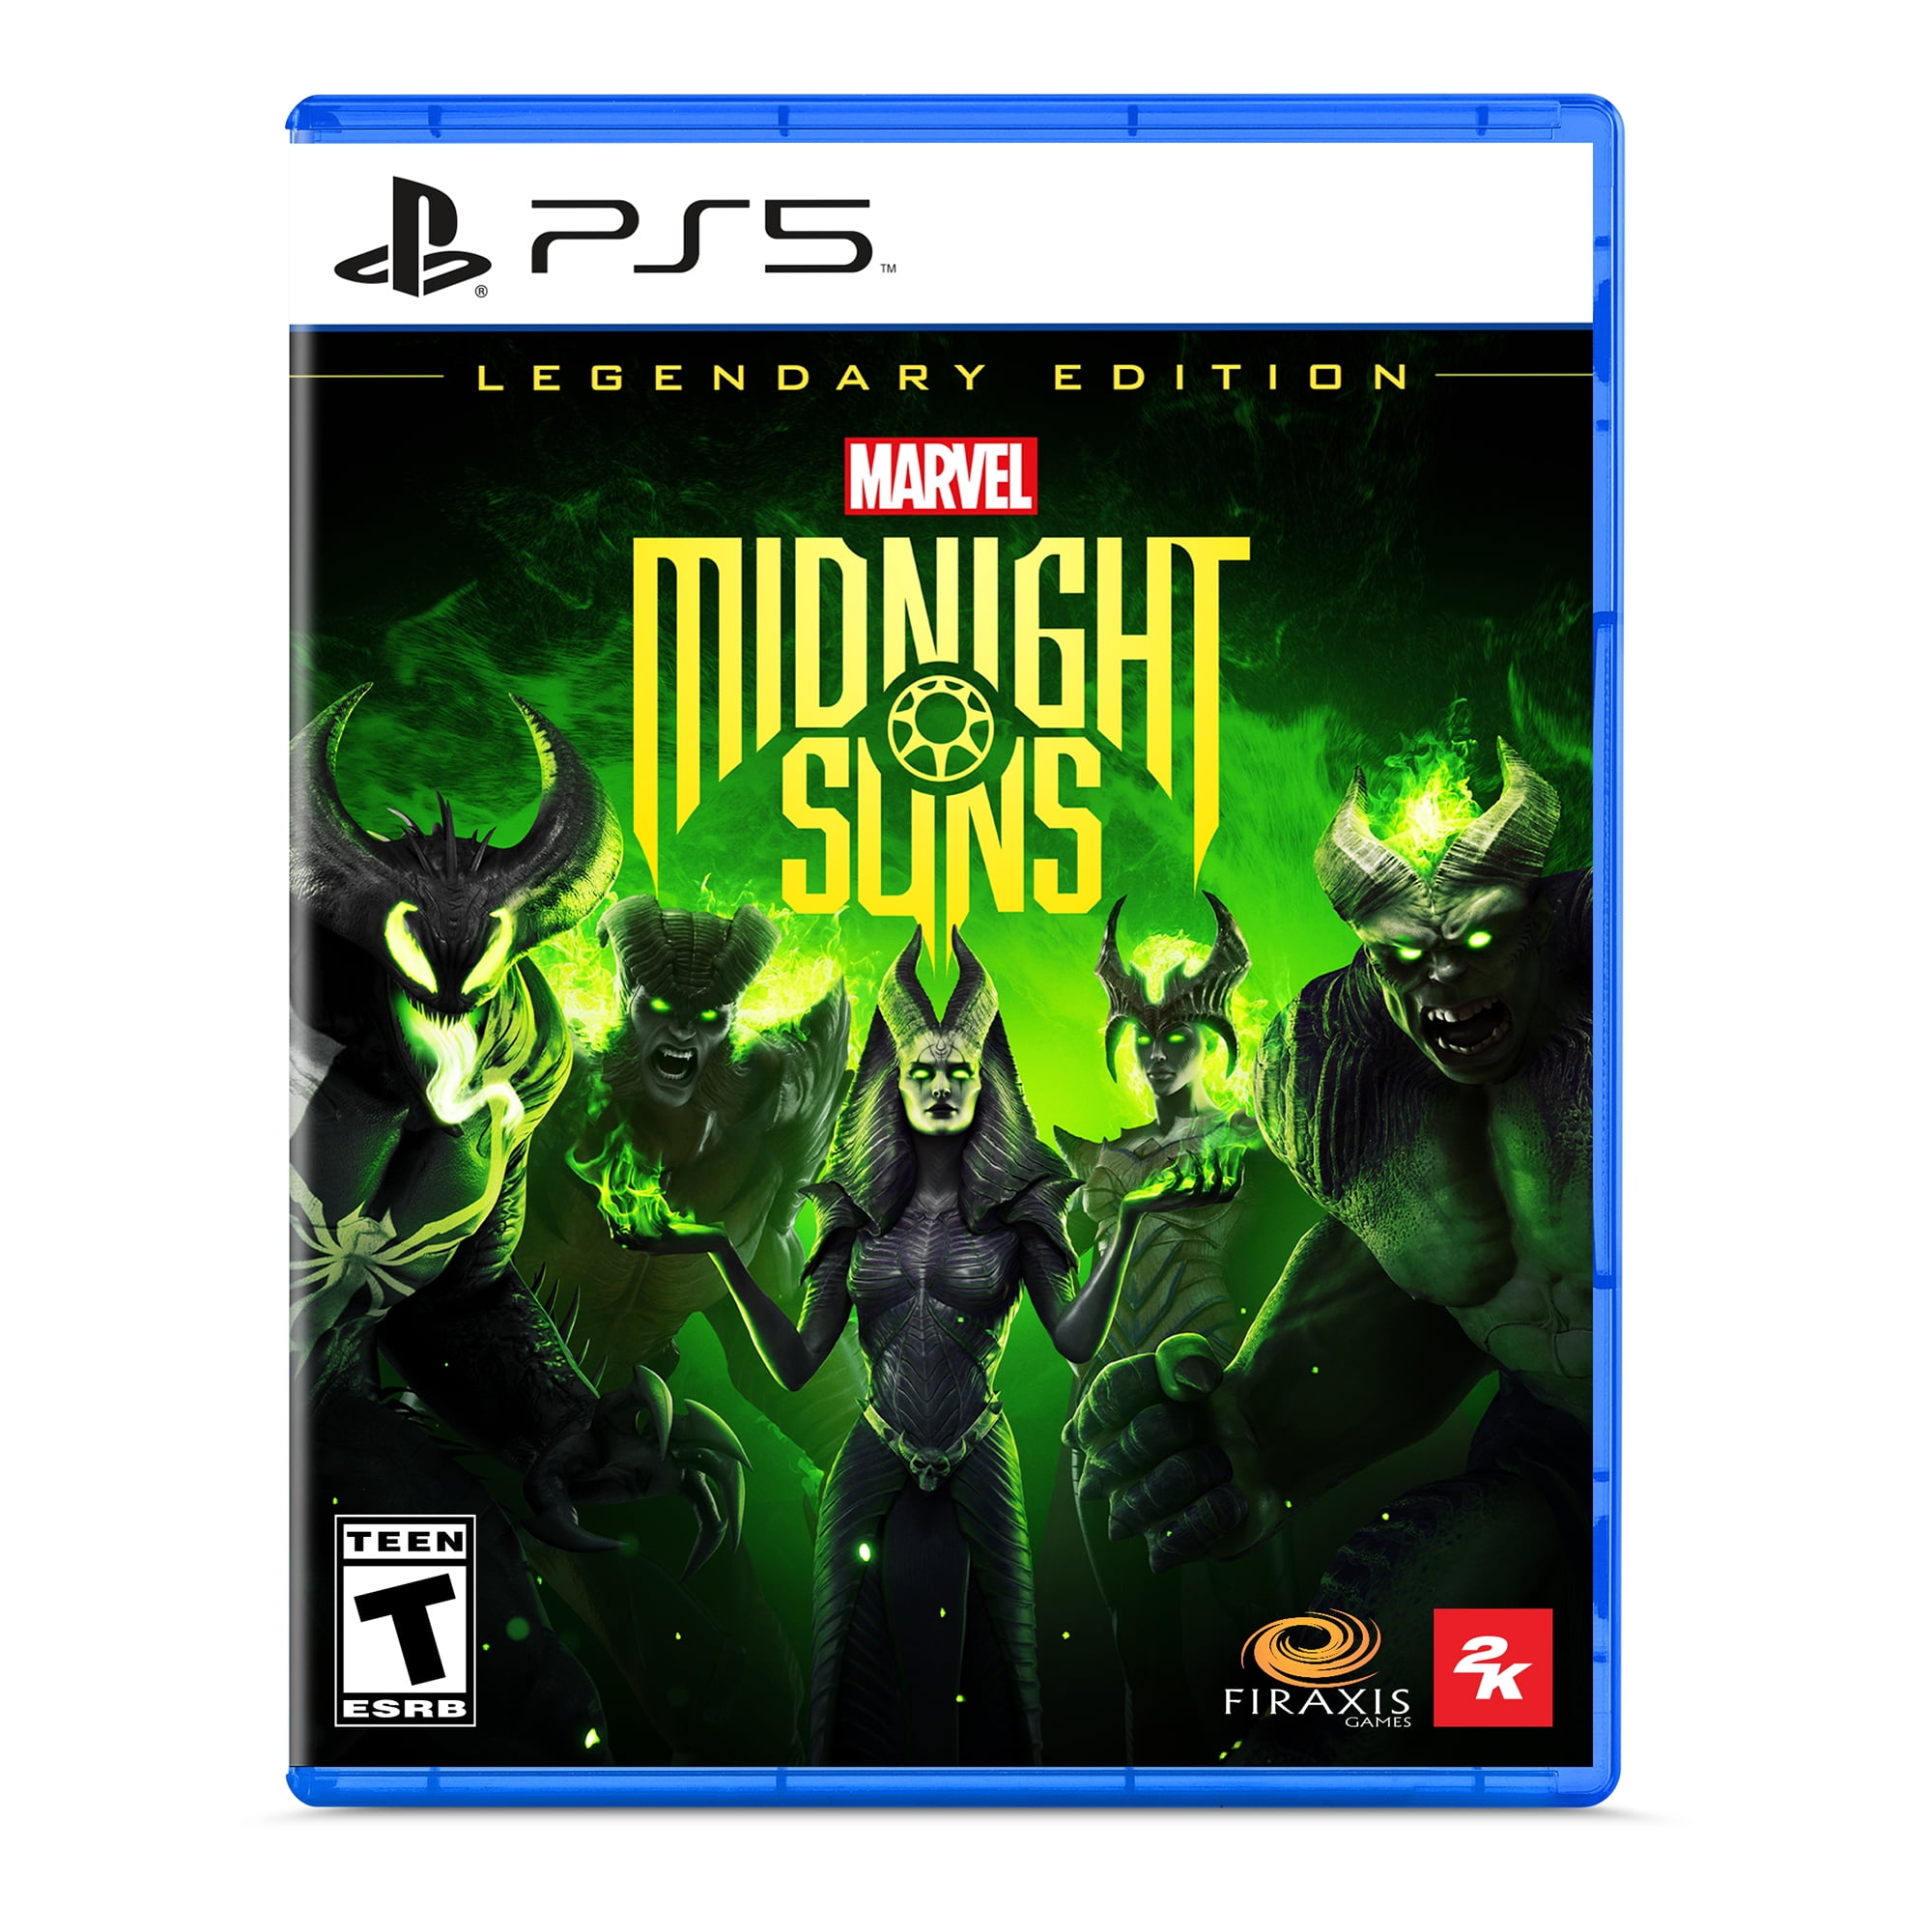 Midnight Suns Release Date - When will Midnight Suns come out?